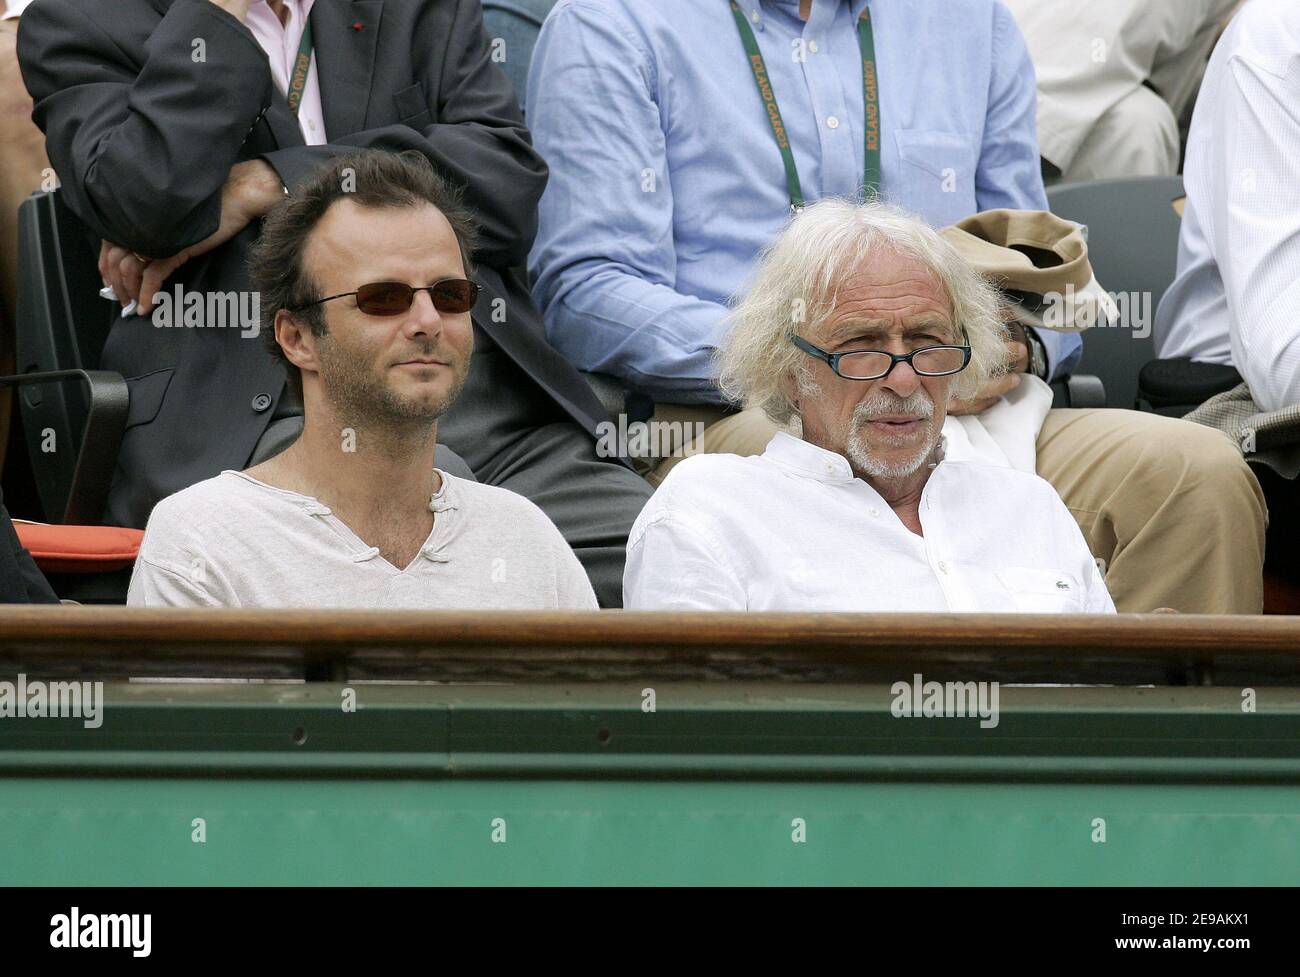 French actors Pierre-Francois Martin-Laval and Pierre Richard watch a game during the 6th day of French Open Tennis tournament held at Roland Garros stadium in Paris, France on June 3, 2006. Photo by Gouhier-Nebinger-Zabulon/ABACAPRESS.COM. Stock Photo